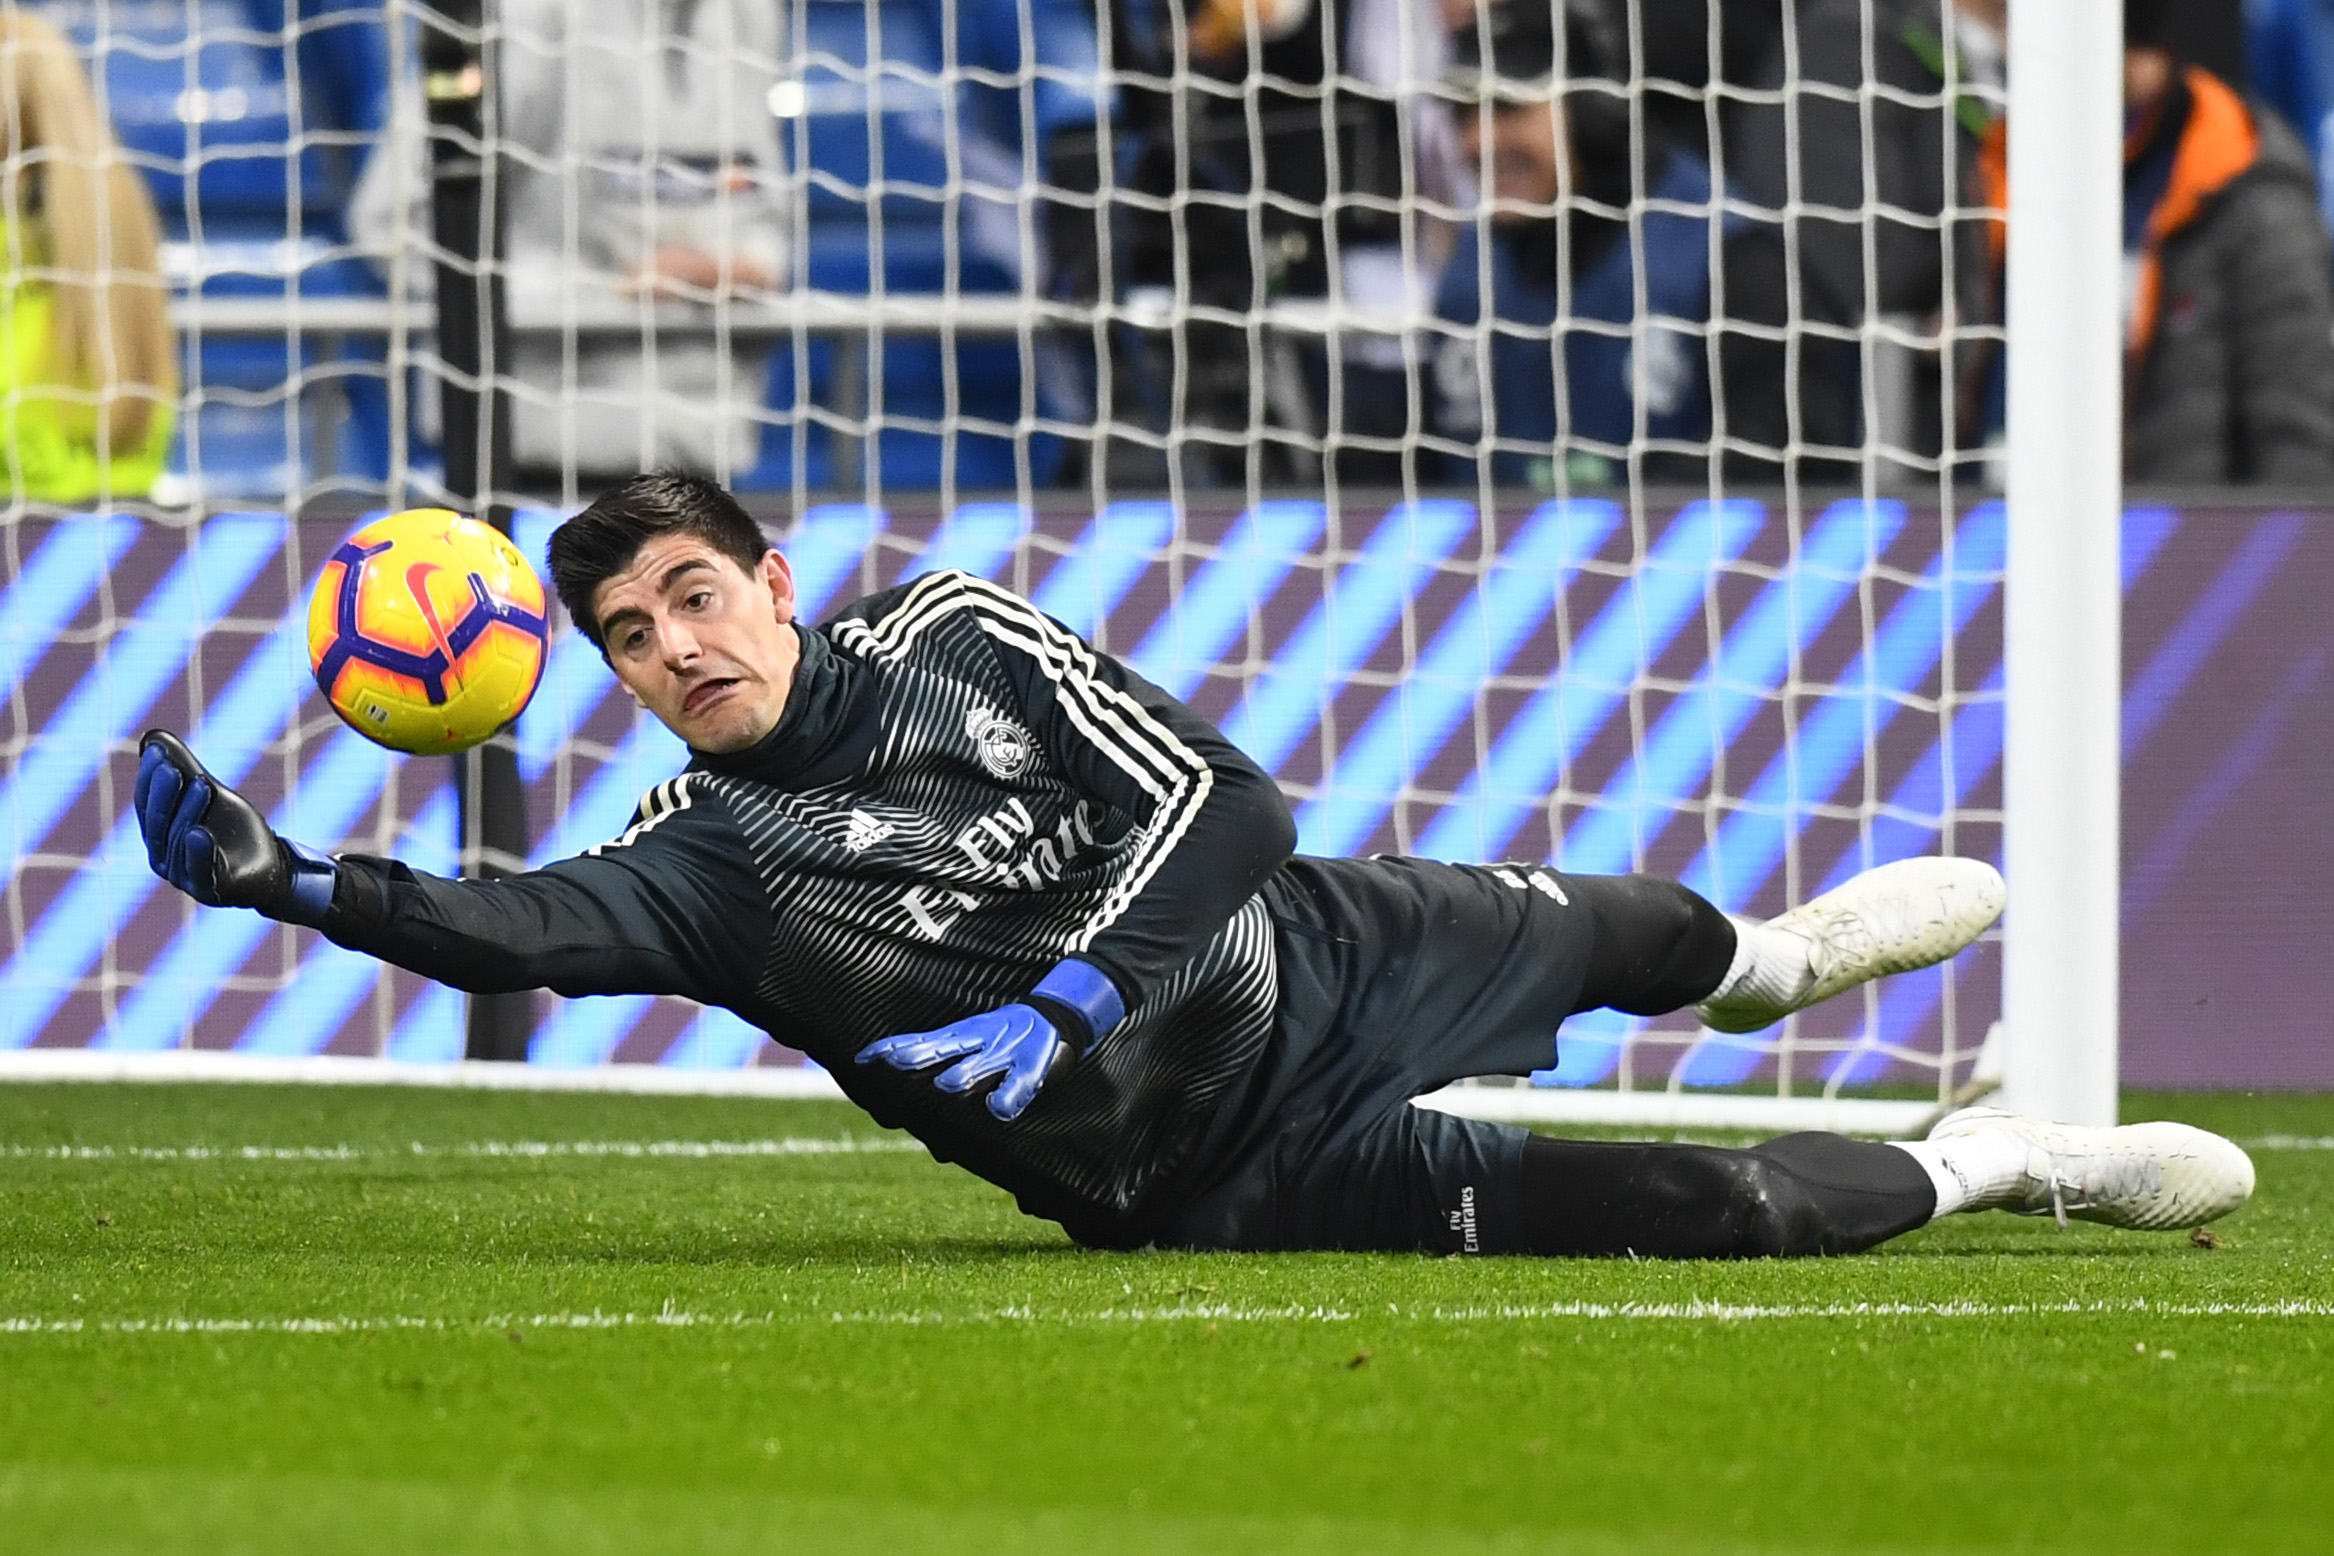 Real Madrid's Belgian goalkeeper Thibaut Courtois warms up before the Spanish League football match between Real Madrid CF and Real Sociedad at the Santiago Bernabeu stadium in Madrid on January 6, 2019. (Photo by GABRIEL BOUYS / AFP)        (Photo credit should read GABRIEL BOUYS/AFP/Getty Images)